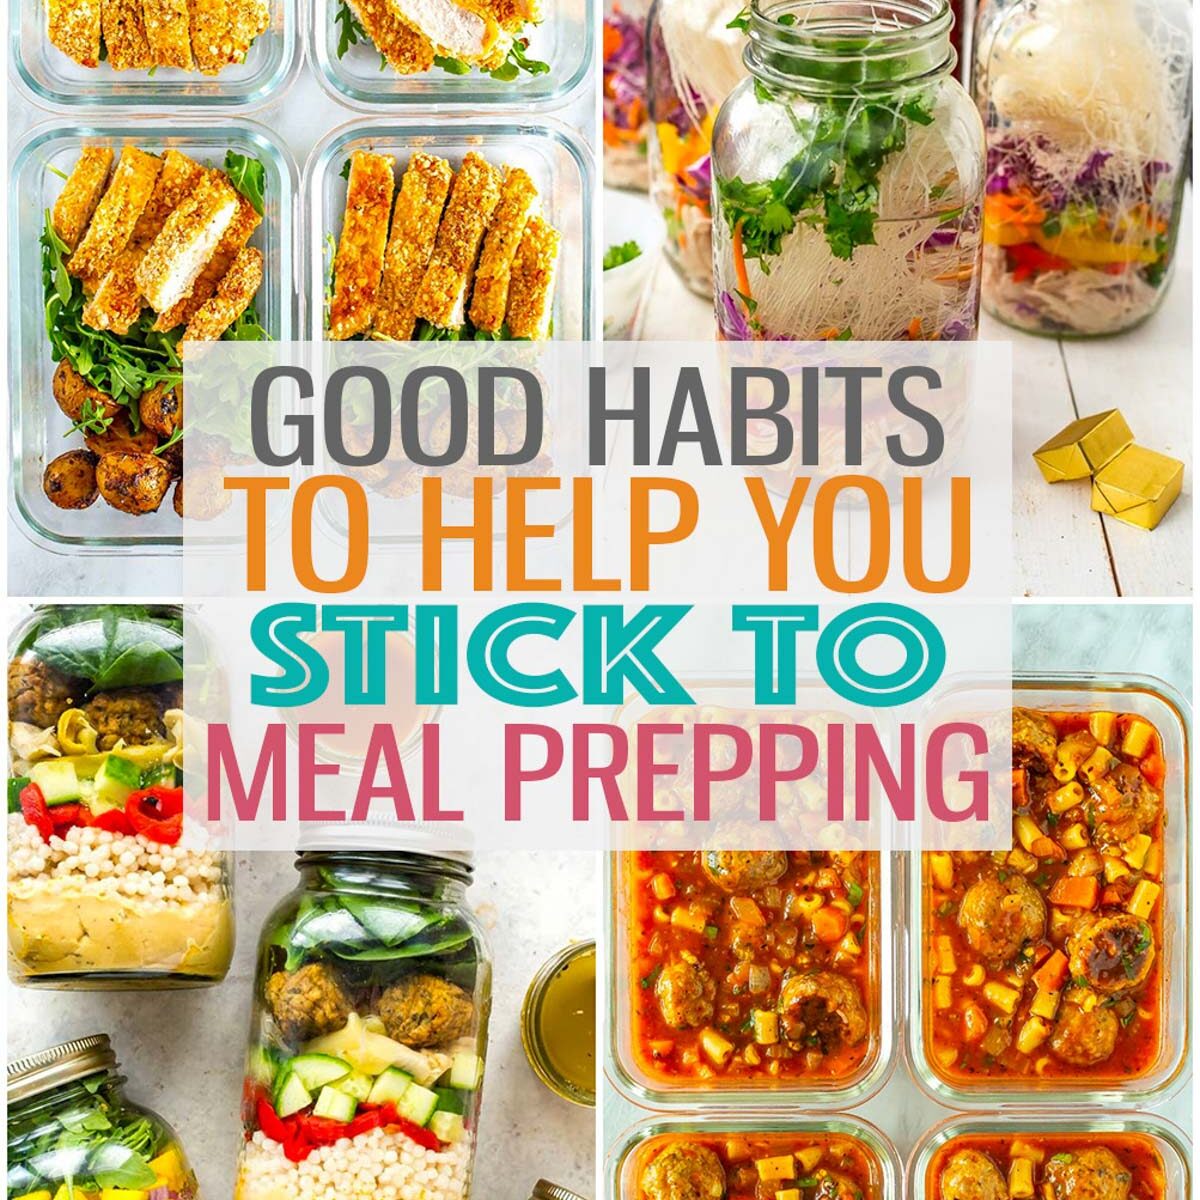 A collage of four different meal prep meals with the text "Good Habits to Help You Stick to Meal Prepping" layered over top.